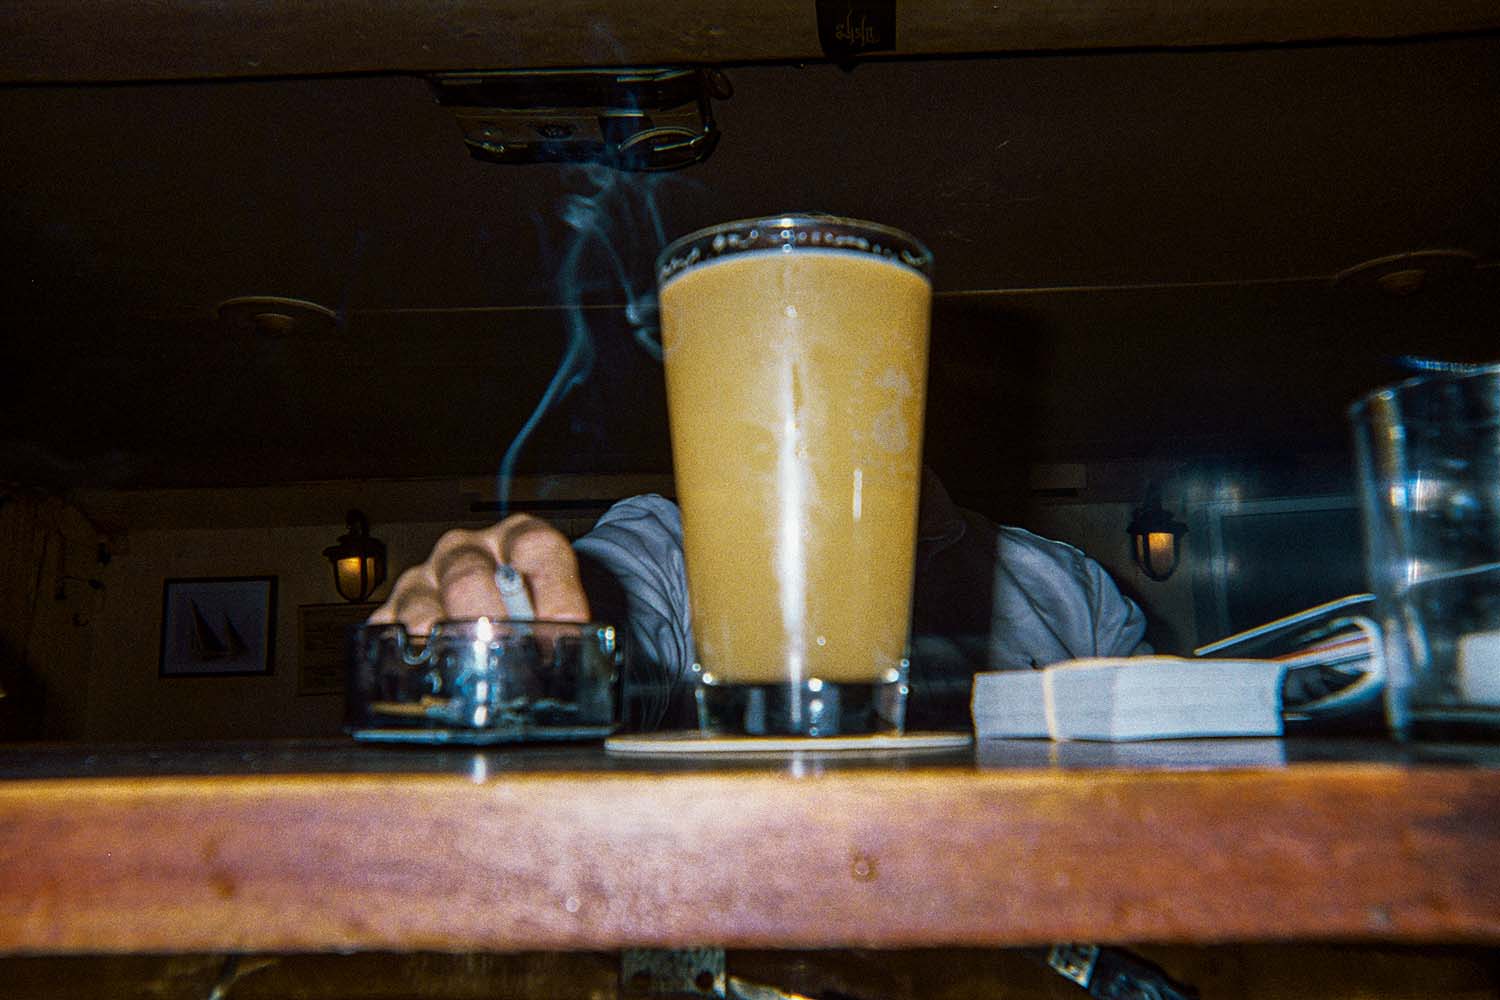 A quiet Monday night calls for beer and a smoke for one customer